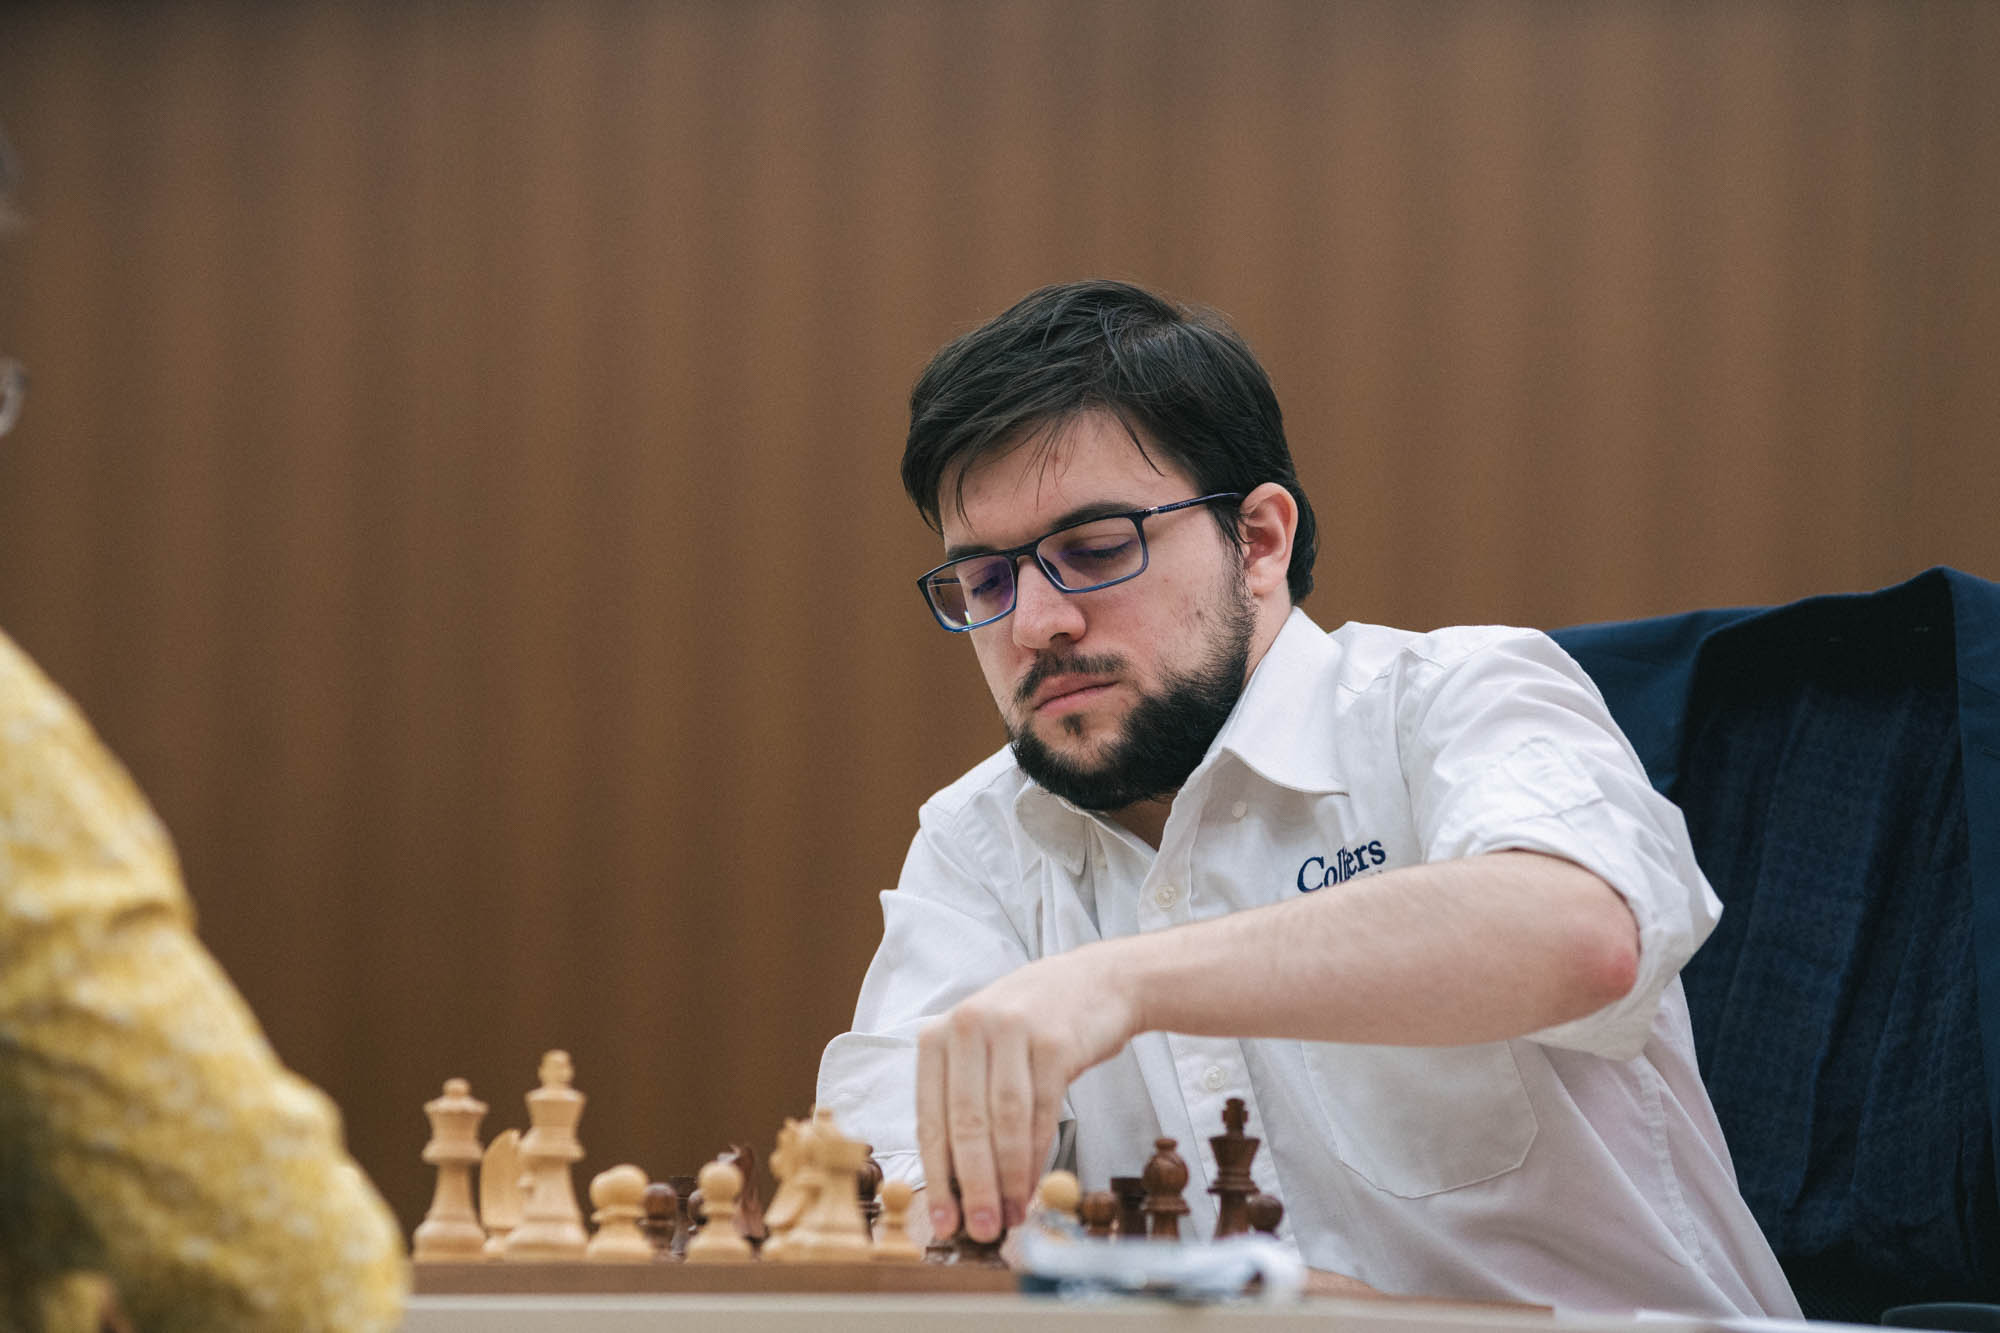 Vachier-Lagrave added as 9th player